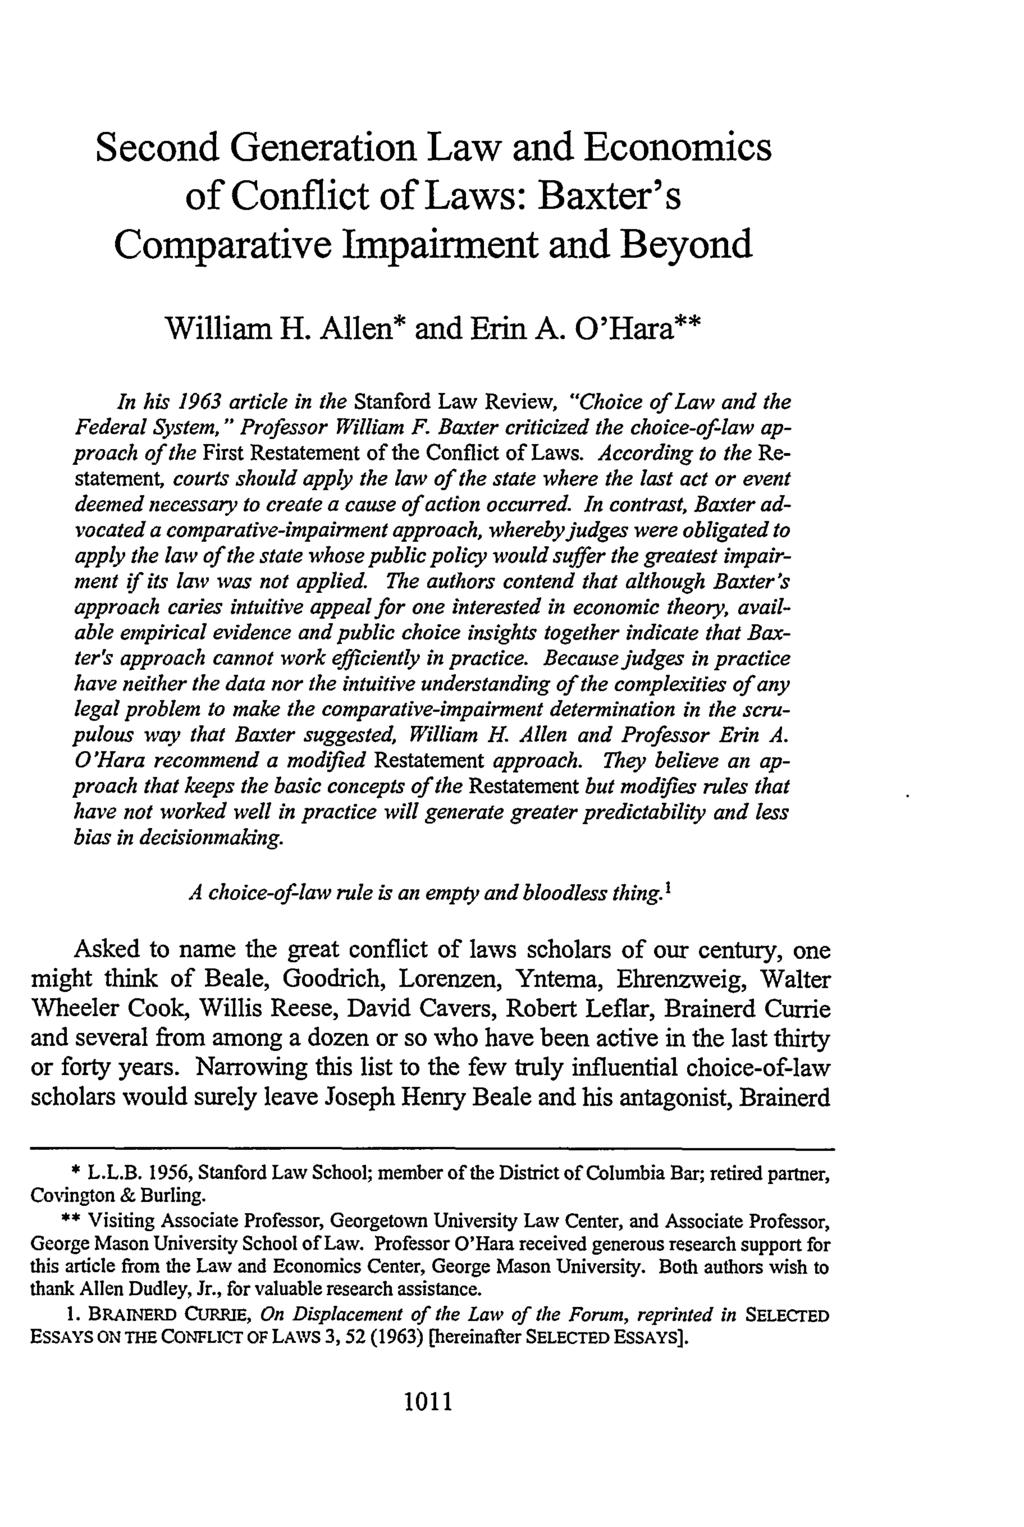 Second Generation Law and Economics of Conflict of Laws: Baxter's Comparative Impairment and Beyond William H. Allen* and Erin A.